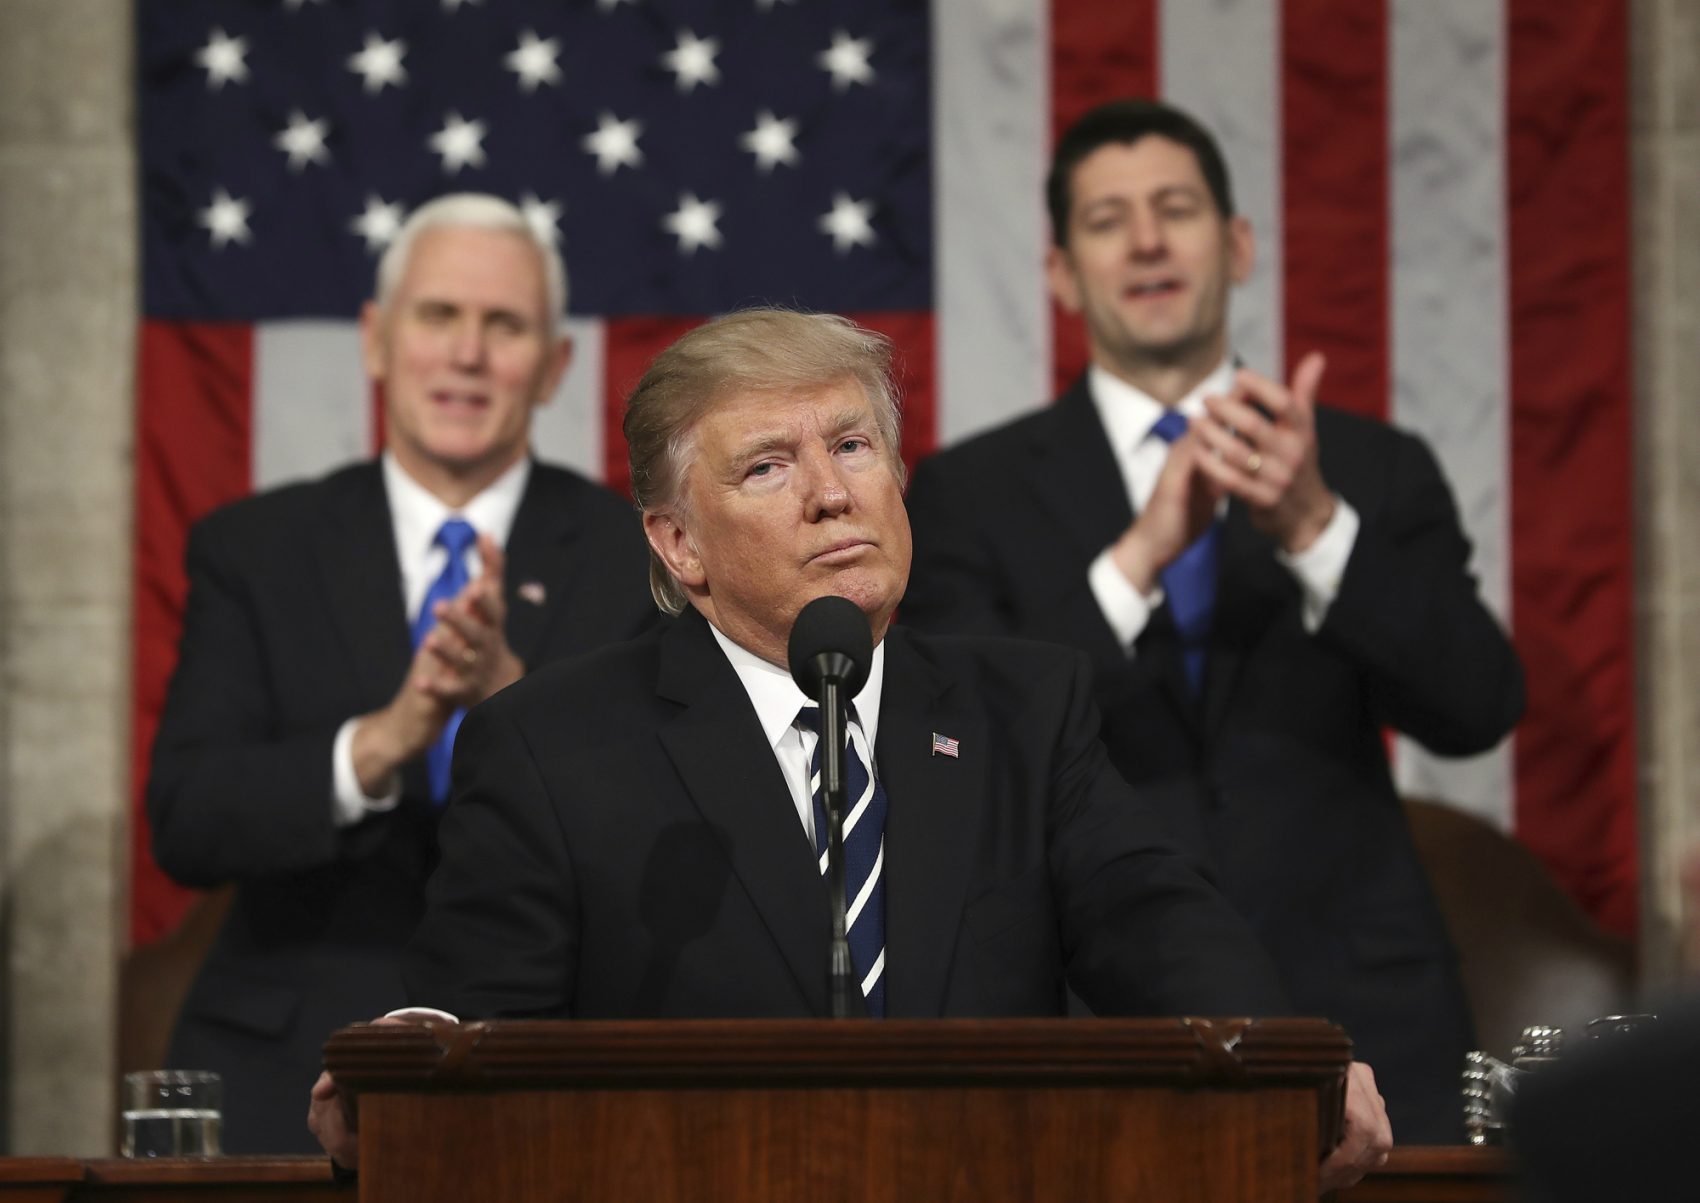 Newsrooms will have to develop factual rapid response teams that can call out a lie as fast as a judge calls a serve during a tennis match, writes Susan E. Reed.  Pictured: President Donald J. Trump reacts after delivering his first address to a joint session of Congress from the floor of the House of Representatives in Washington, DC, USA, 28 February 2017. (Jim Lo Scalzo/Pool Image via AP)